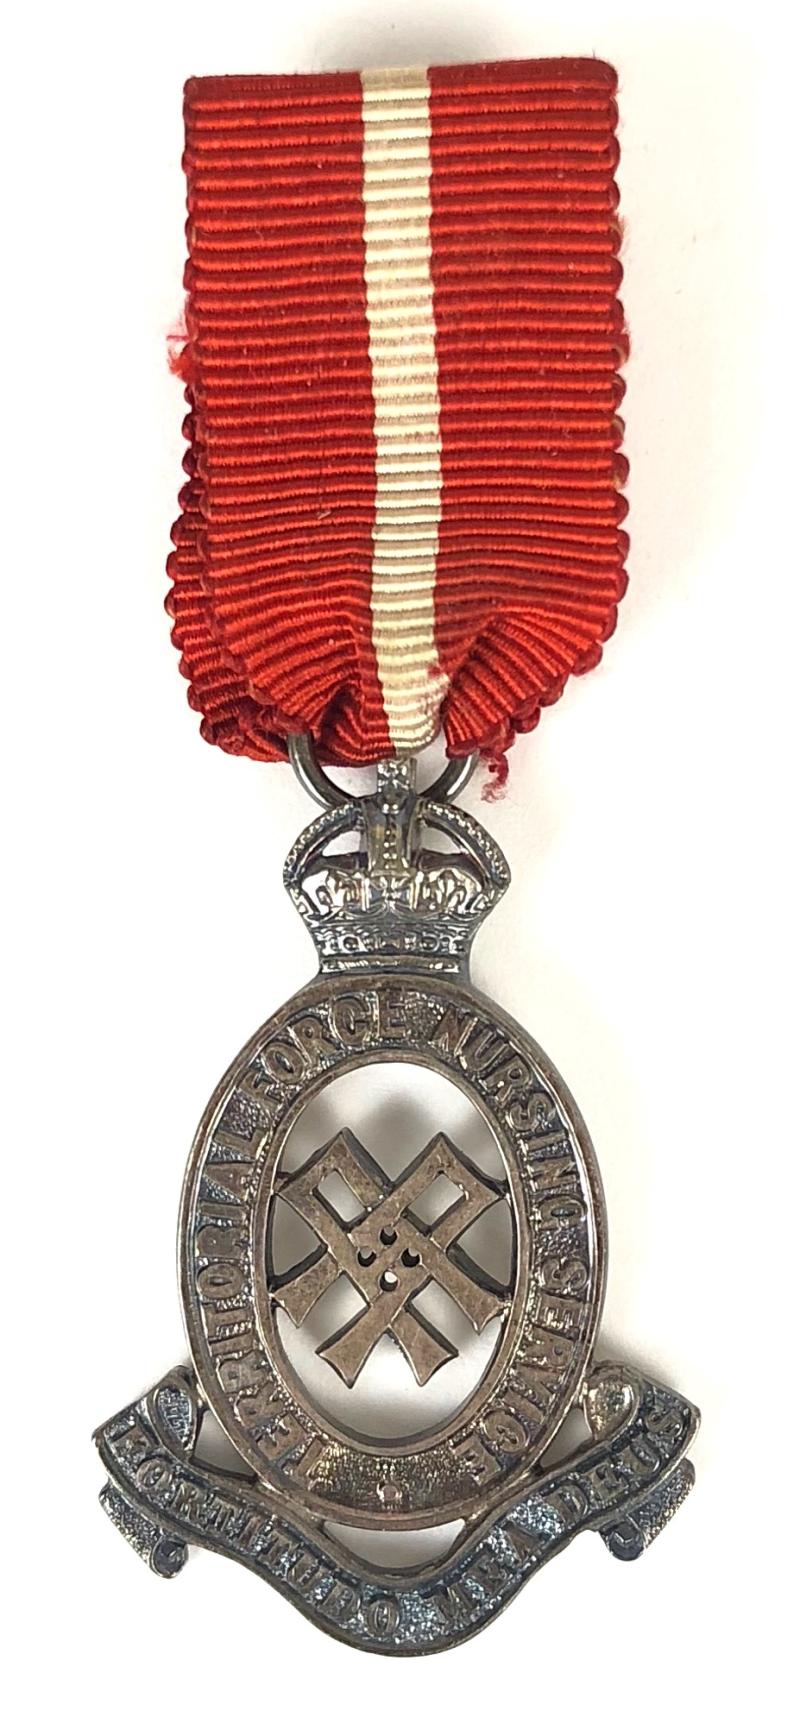 Territorial Force Nursing Service TFNS silver tippet badge medal c.1908 -1921